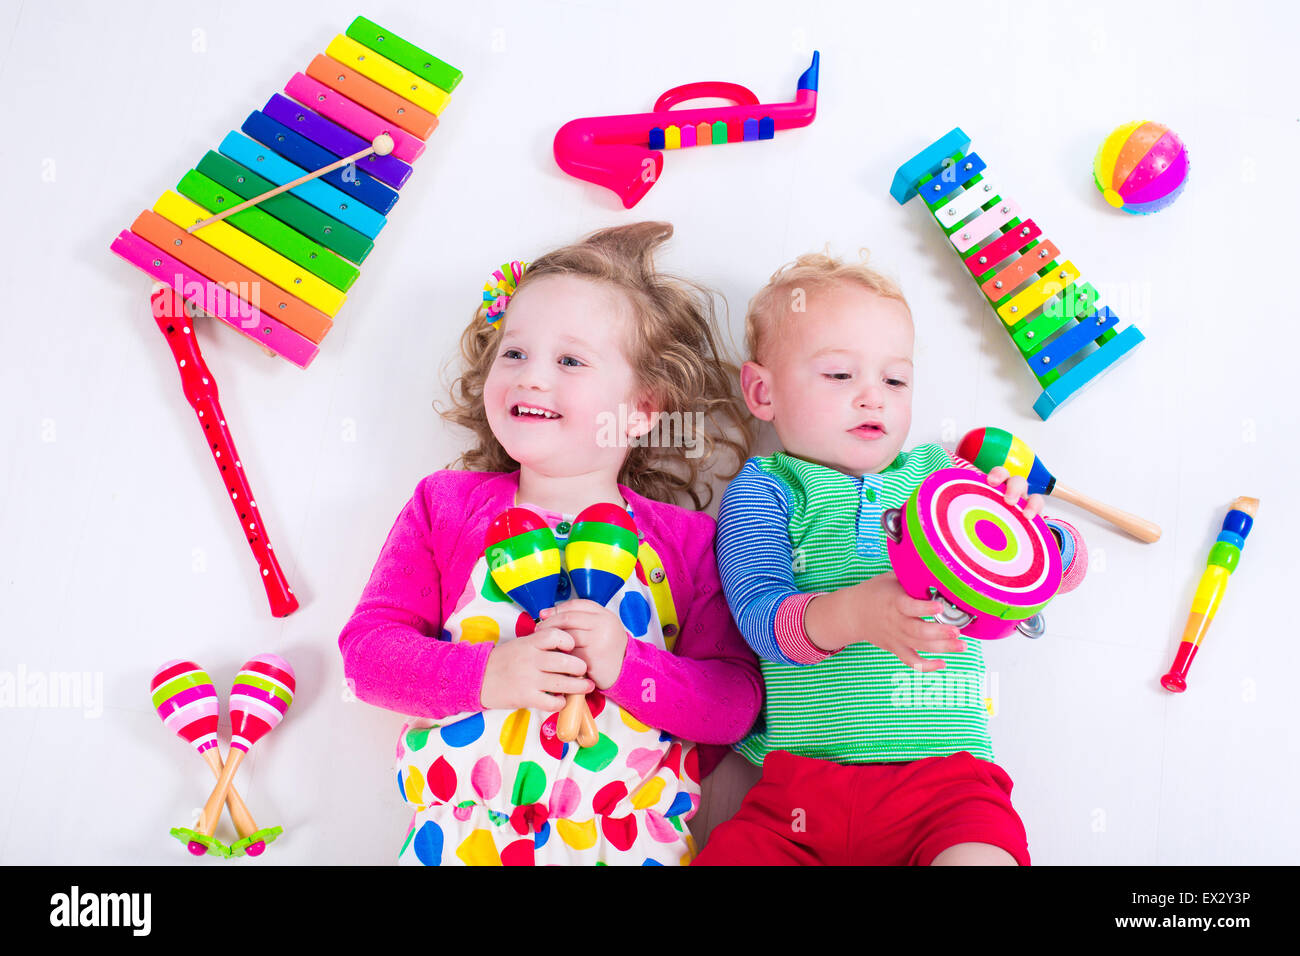 Child with music instruments. Musical education for kids. Colorful wooden art toys for kids. Little girl and boy play music. Stock Photo